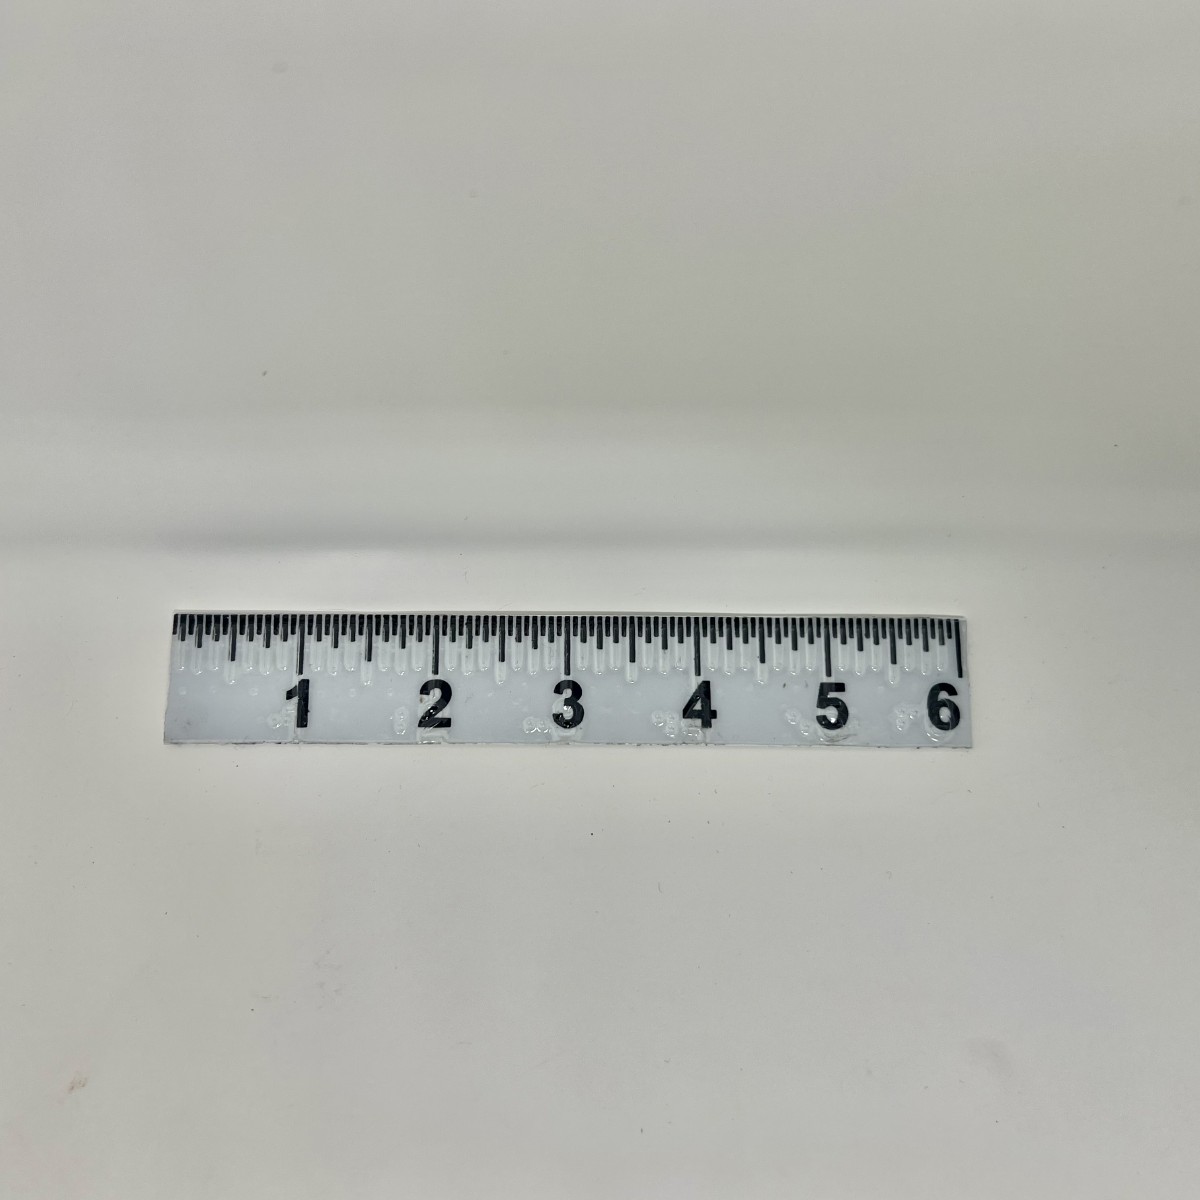 Larger picture of our Print Braille Ruler